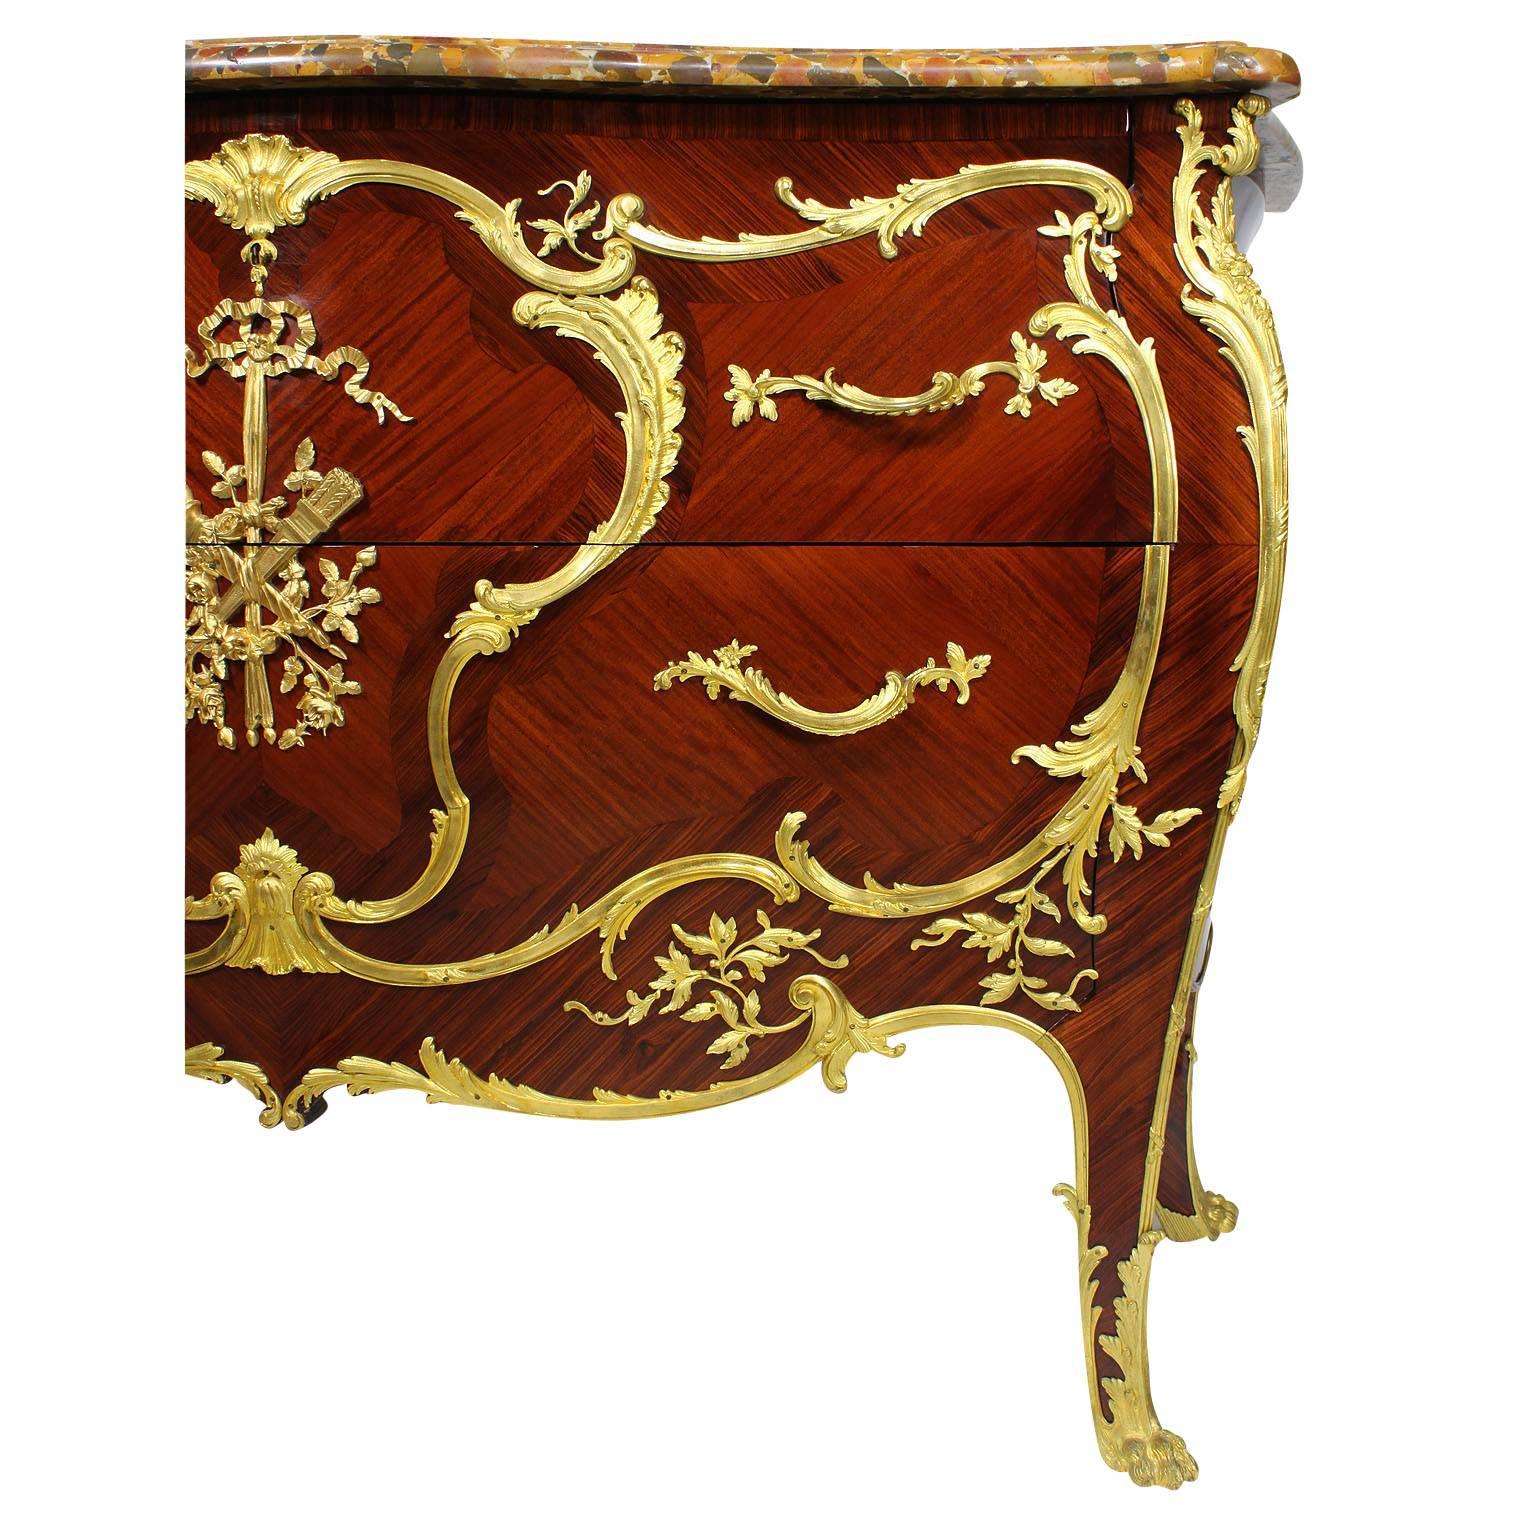 Early 20th Century French 19th-20th Century Louis XV Style Ormolu-Mounted Commode For Sale